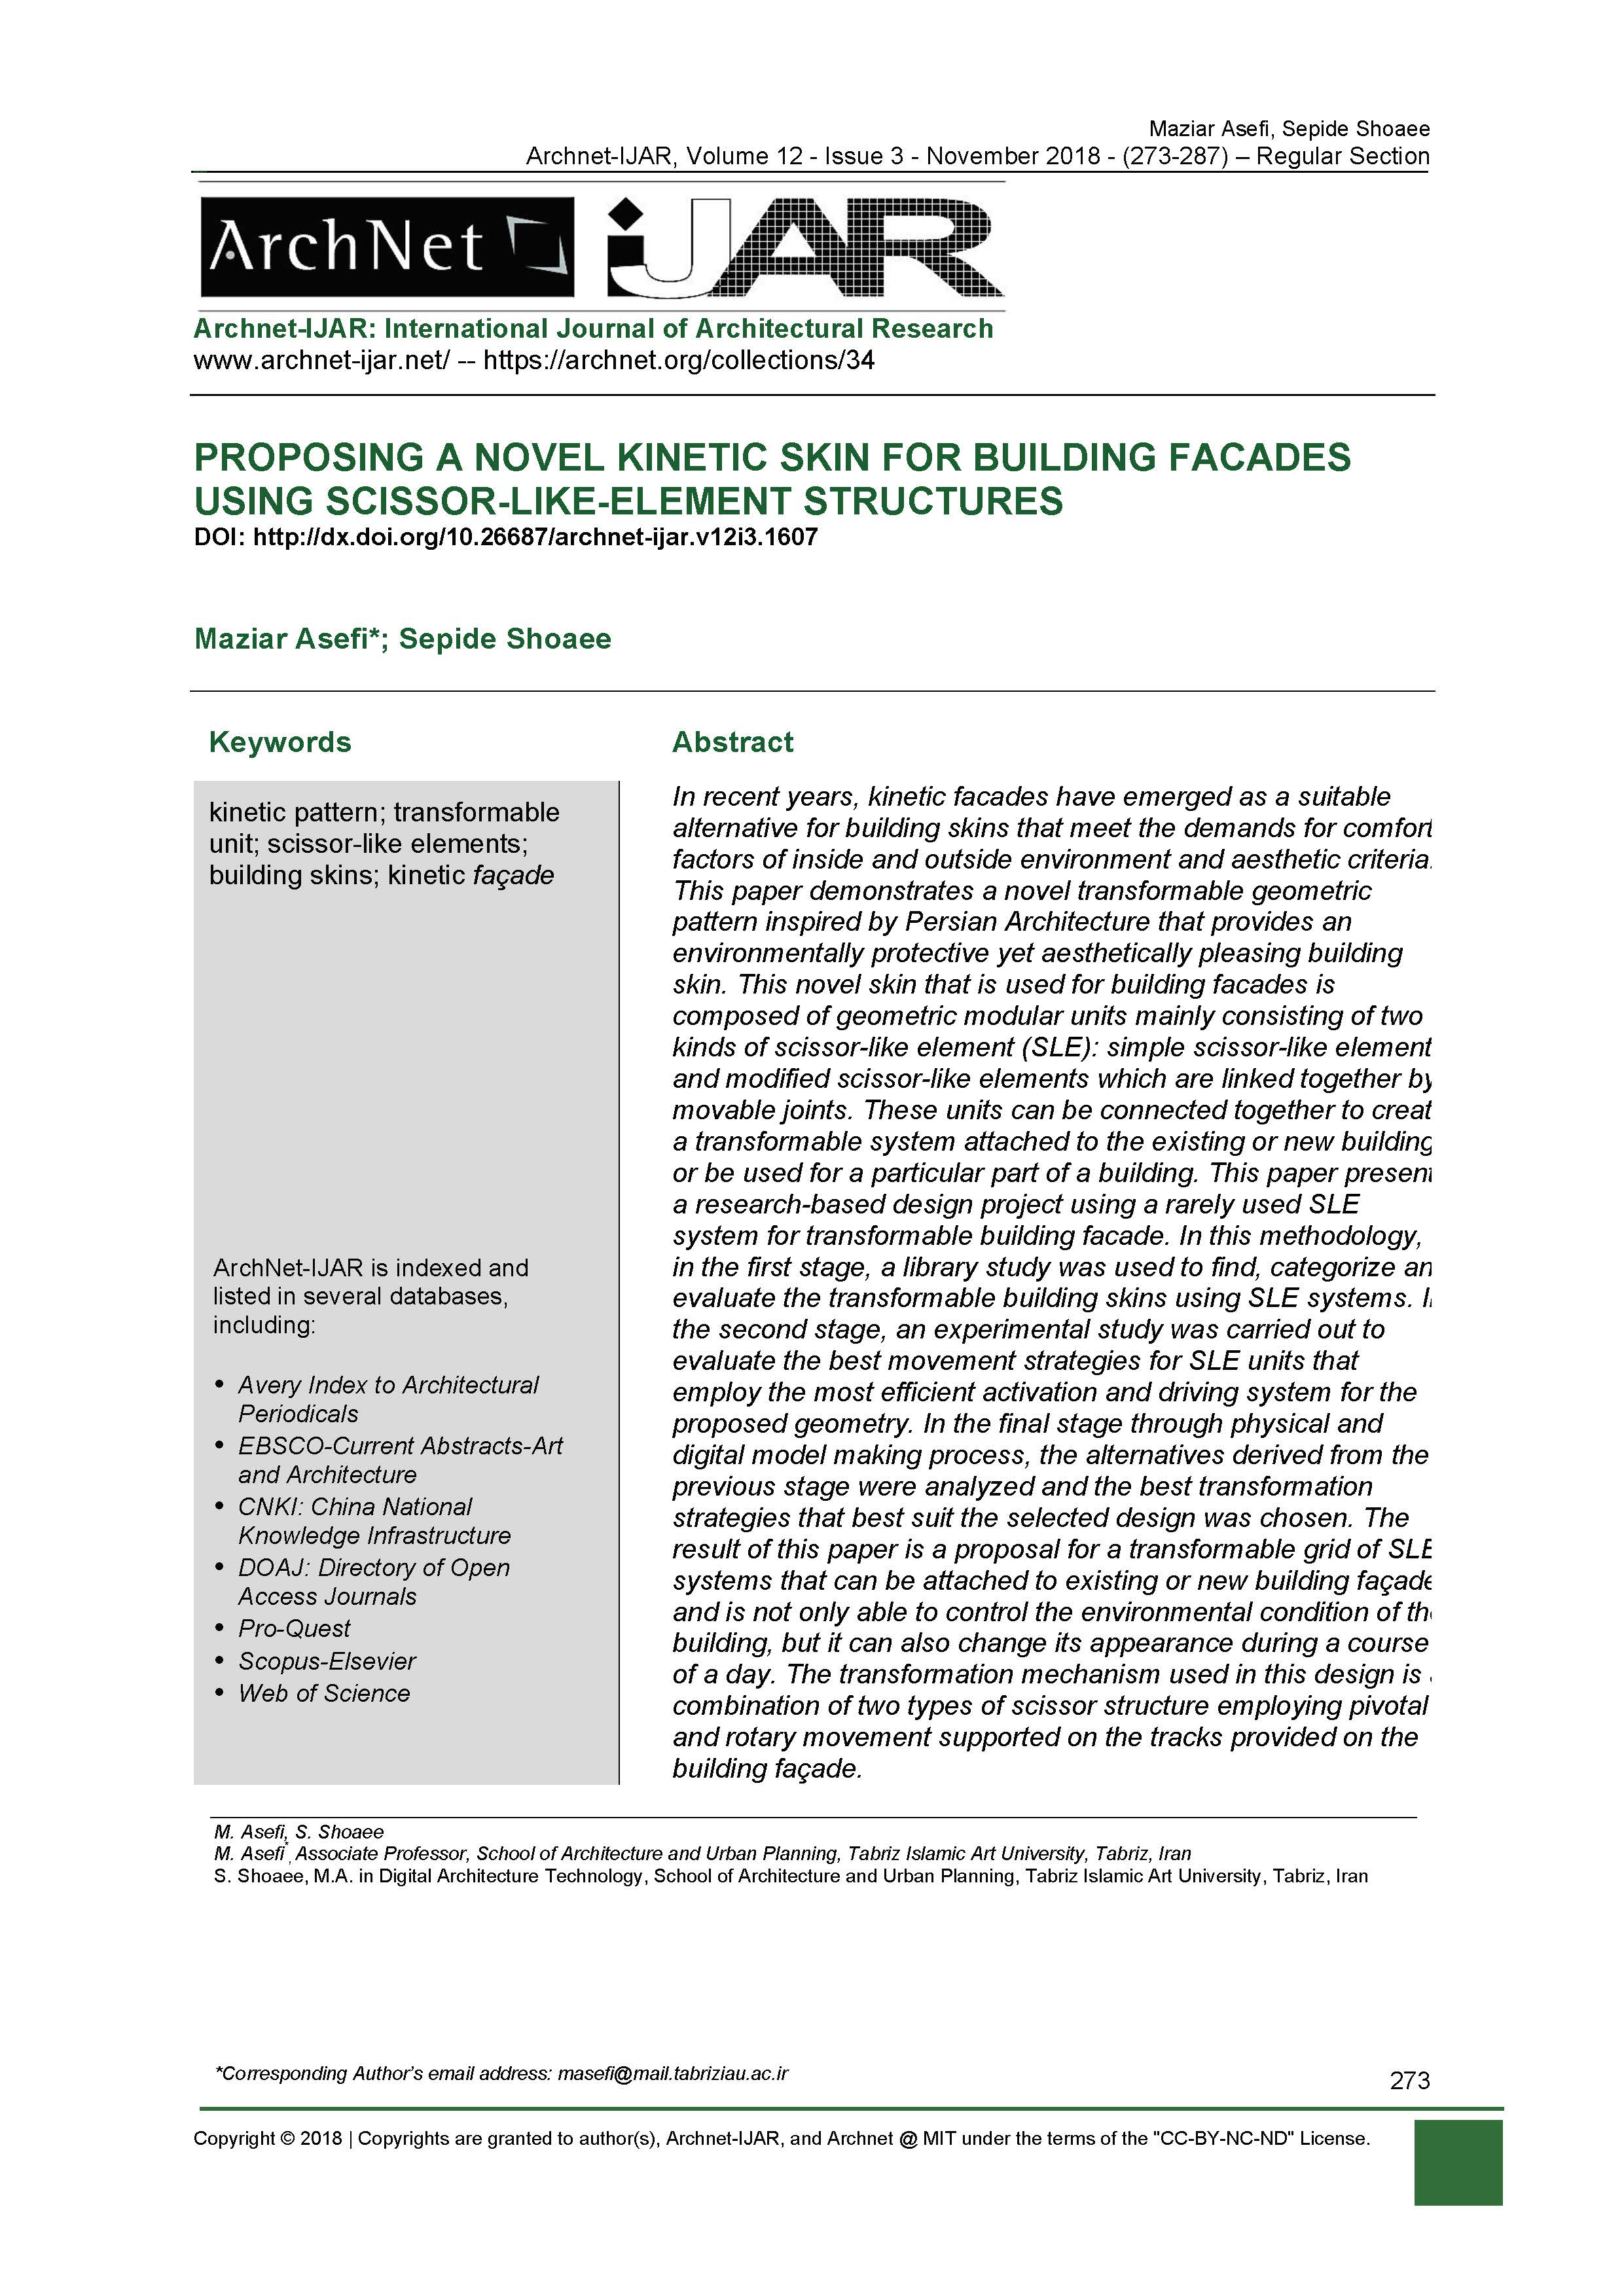 Sepide Shoaee - <div style="text-align: justify;">In recent years, kinetic facades have emerged as a suitable alternative for building skins that meet the demands for comfort factors of inside and outside environment and aesthetic criteria. This paper demonstrates a novel transformable geometric pattern inspired by Persian Architecture that provides an environmentally protective yet aesthetically pleasing building skin. This novel skin that is used for building facades is composed of geometric modular units mainly consisting of two kinds of scissor-like element (SLE): simple scissor-like elements and modified scissor-like elements which are linked together by movable joints. These units can be connected together to create a transformable system attached to the existing or new buildings or be used for a particular part of a building. This paper presents a research-based design project using a rarely used SLE system for transformable building facade. In this methodology, in the first stage, a library study was used to find, categorize and evaluate the transformable building skins using SLE systems. In the second stage, an experimental study was carried out to evaluate the best movement strategies for SLE units that employ the most efficient activation and driving system for the proposed geometry. In the final stage through physical and digital model making process, the alternatives derived from the previous stage were analyzed and the best transformation strategies that best suit the selected design was chosen. The result of this paper is a proposal for a transformable grid of SLE systems that can be attached to existing or new building façade and is not only able to control the environmental condition of the building, but it can also change its appearance during a course of a day. The transformation mechanism used in this design is a combination of two types of scissor structure employing pivotal and rotary movement supported on the tracks provided on the building façade.</div>